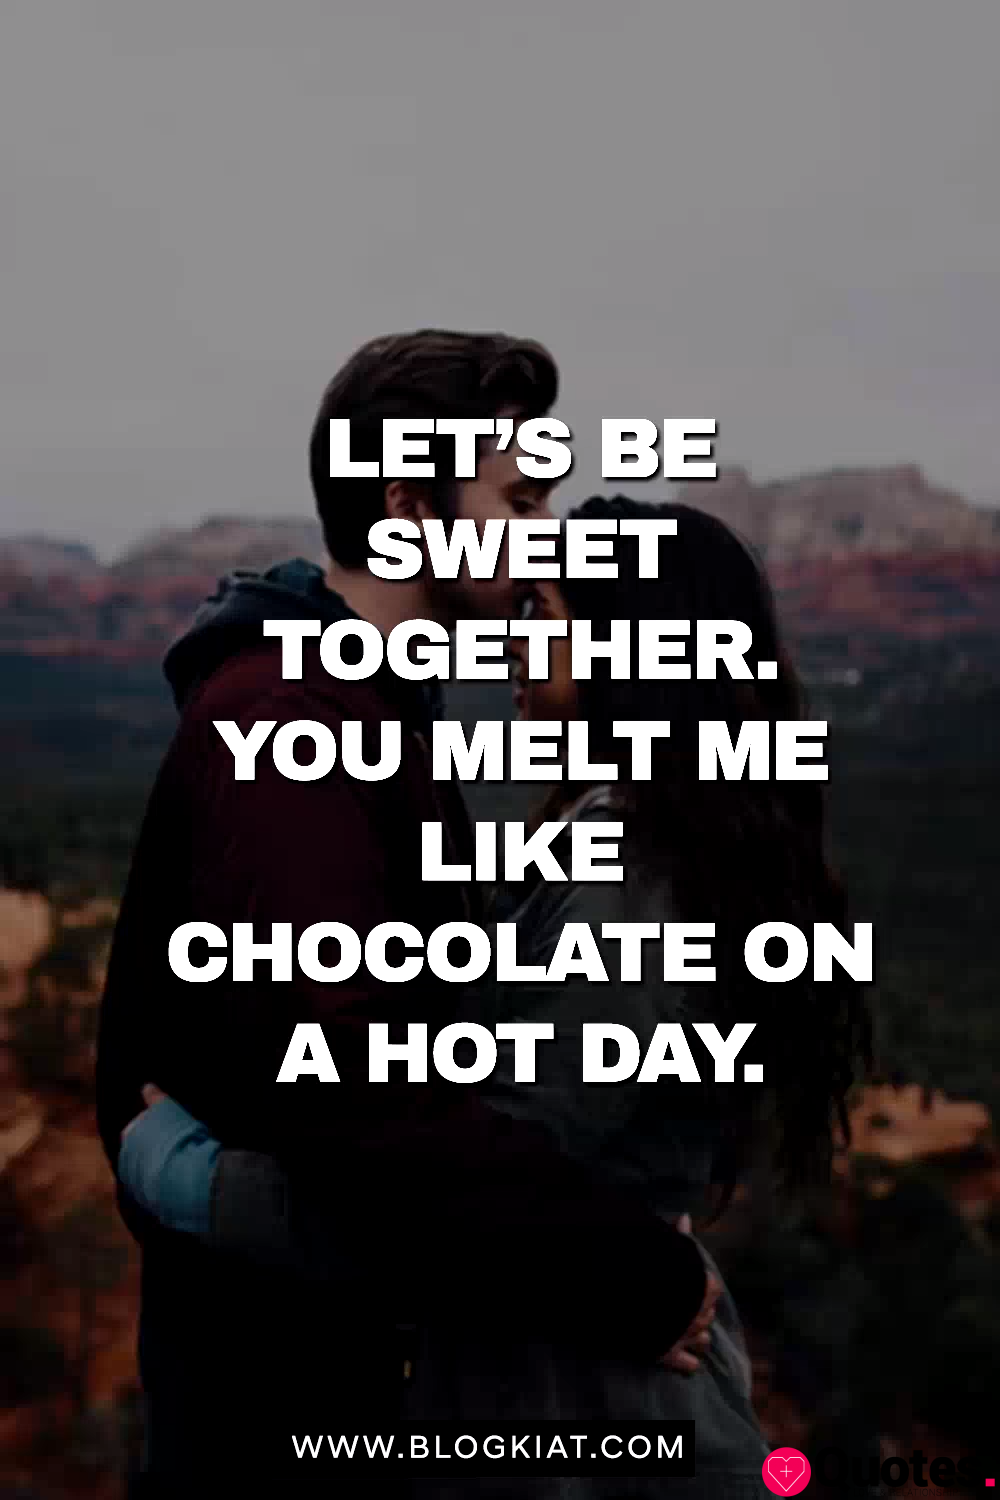 28 Love Quotes For Her Short Love Status Video Blogkiat Deep Love Quotes For Her Love Quotes Daily Leading Love Relationship Quotes Sayings Collections